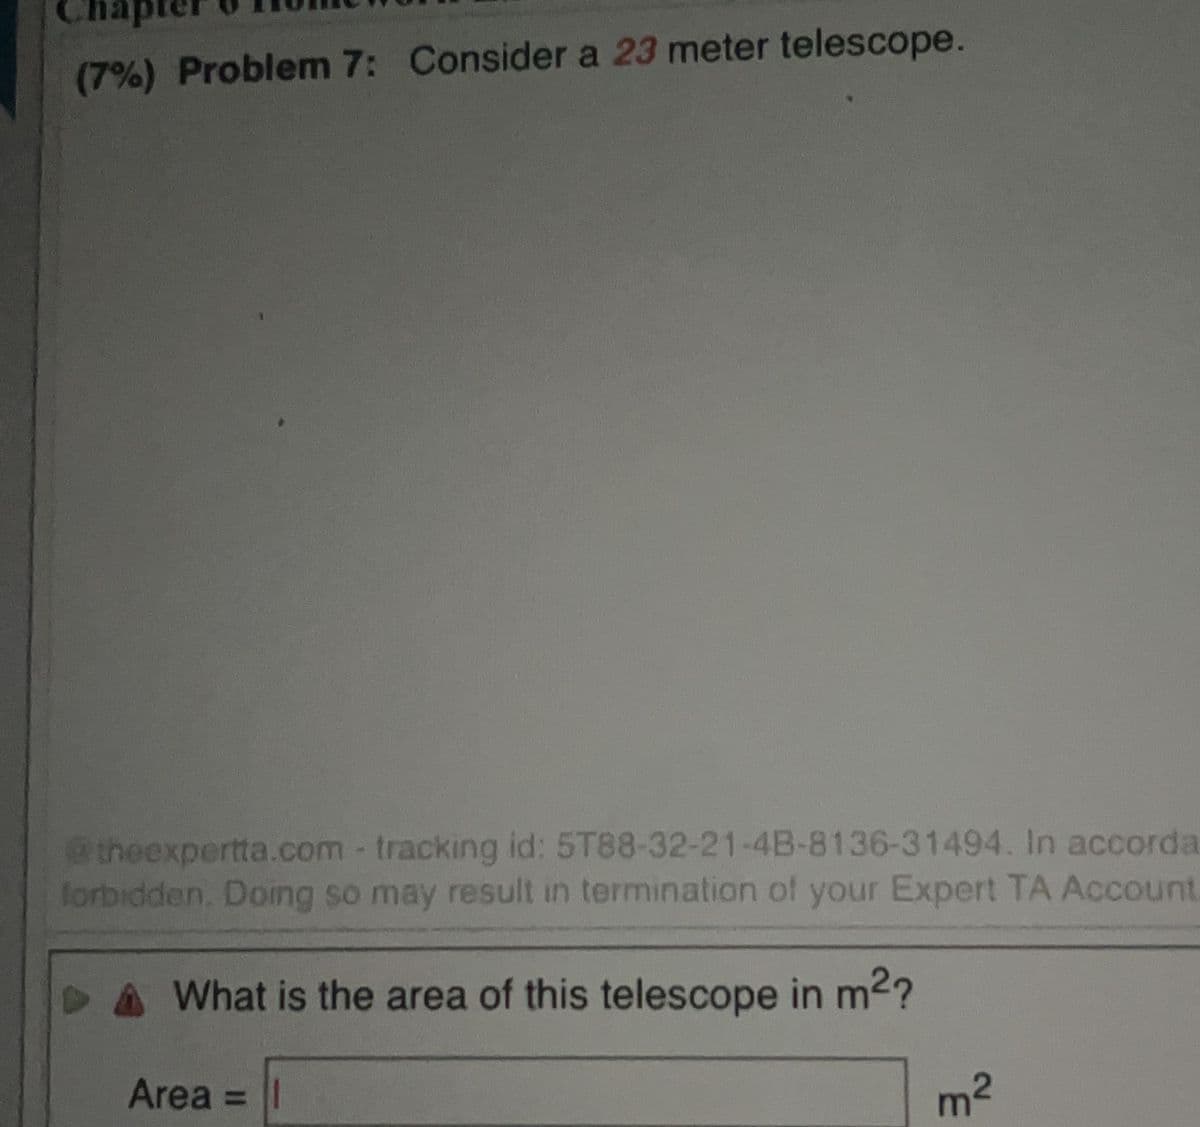 ote
(7%) Problem 7: Consider a 23 meter telescope.
theexpertta.com -tracking id: 5T88-32-21-4B-8136-31494. In accorda
lorbidden. Doing so may result in termination of your Expert TA Account.
What is the area of this telescope in m2?
Area =||
m2
